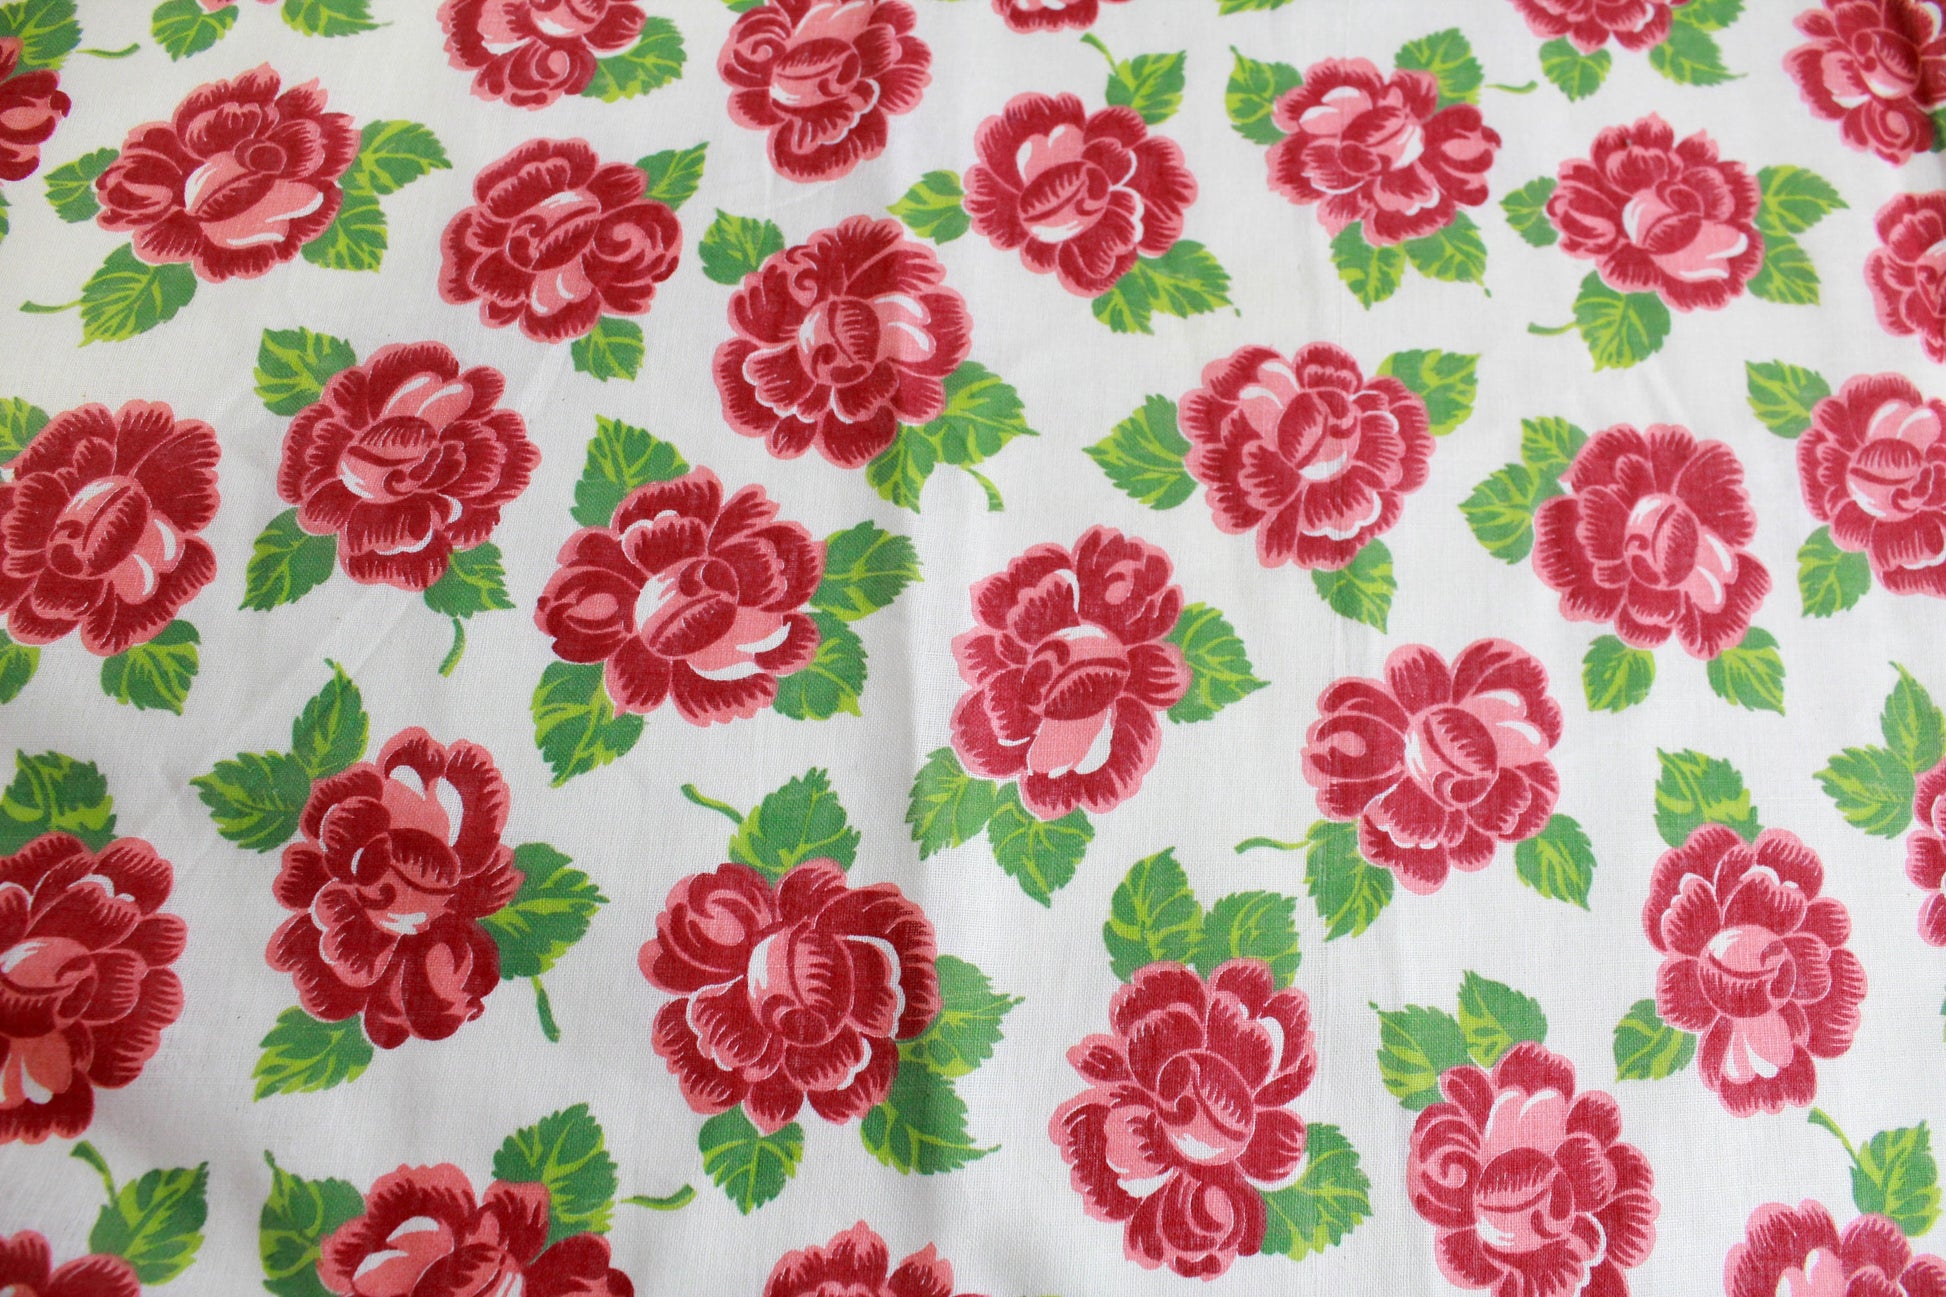 1940s/50s Floral Printed Cotton Fabric, 5 Yards, Rose – Ian Drummond Vintage